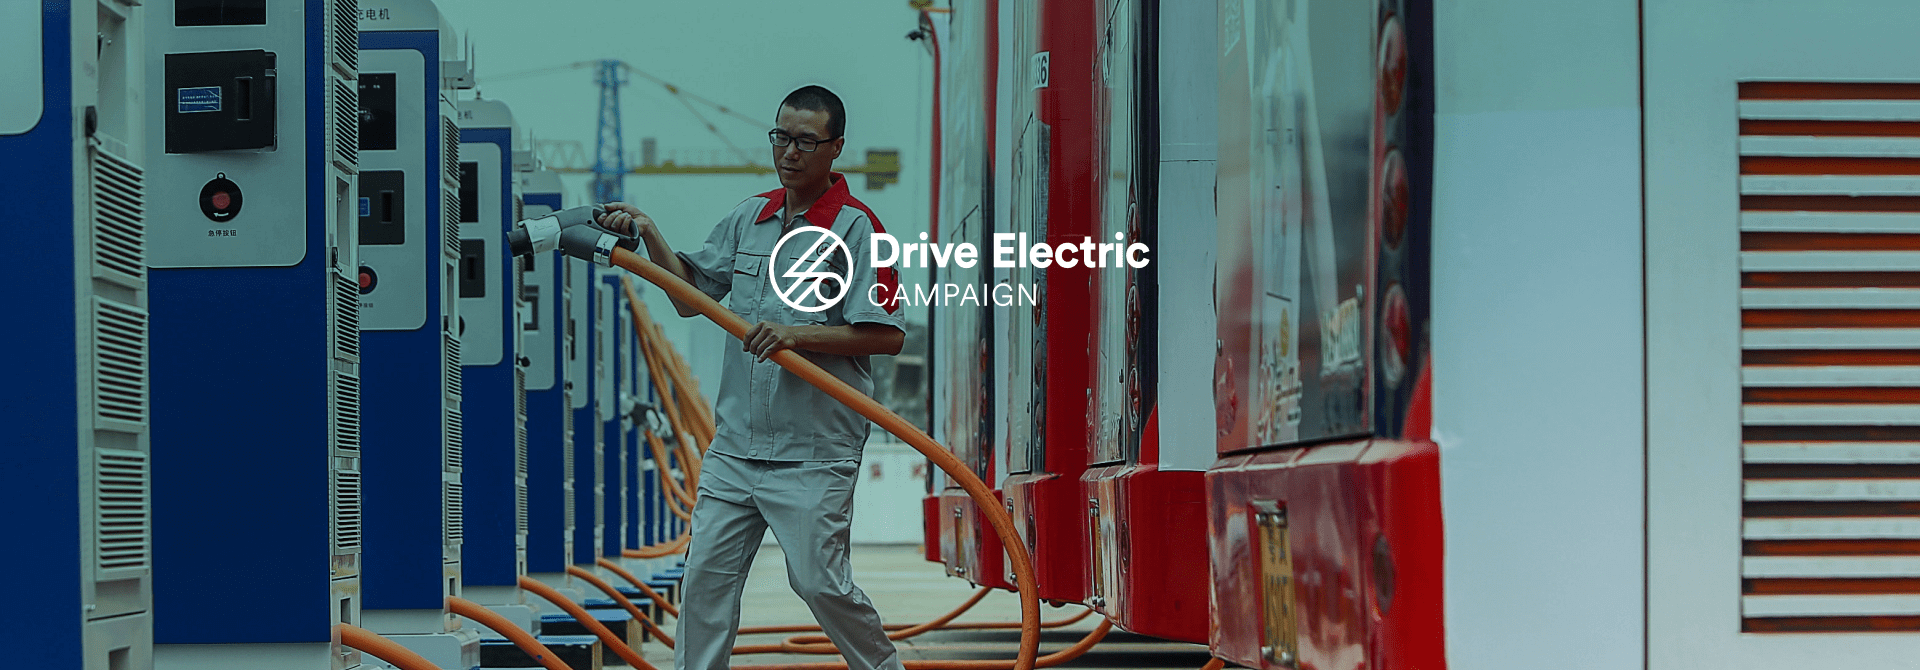 The Drive Electric Campaign: 100% electric road transportation for the world